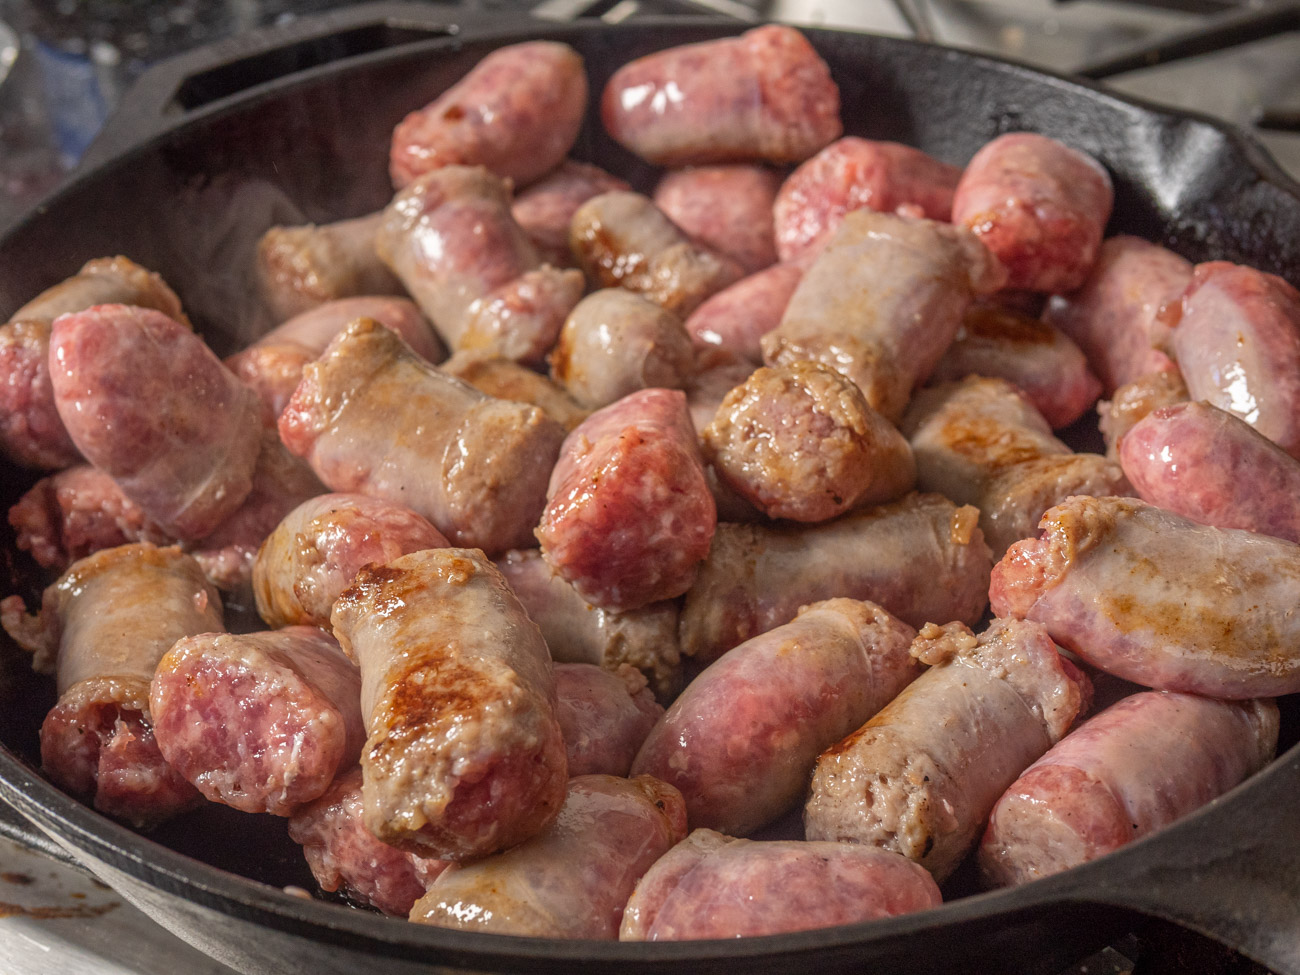 Cut bratwursts into thirds. Pour 1 tablespoon of olive oil into a large skillet. Over medium heat sear the brats to brown the outside. Place cooked brats in a 9x13 casserole dish.